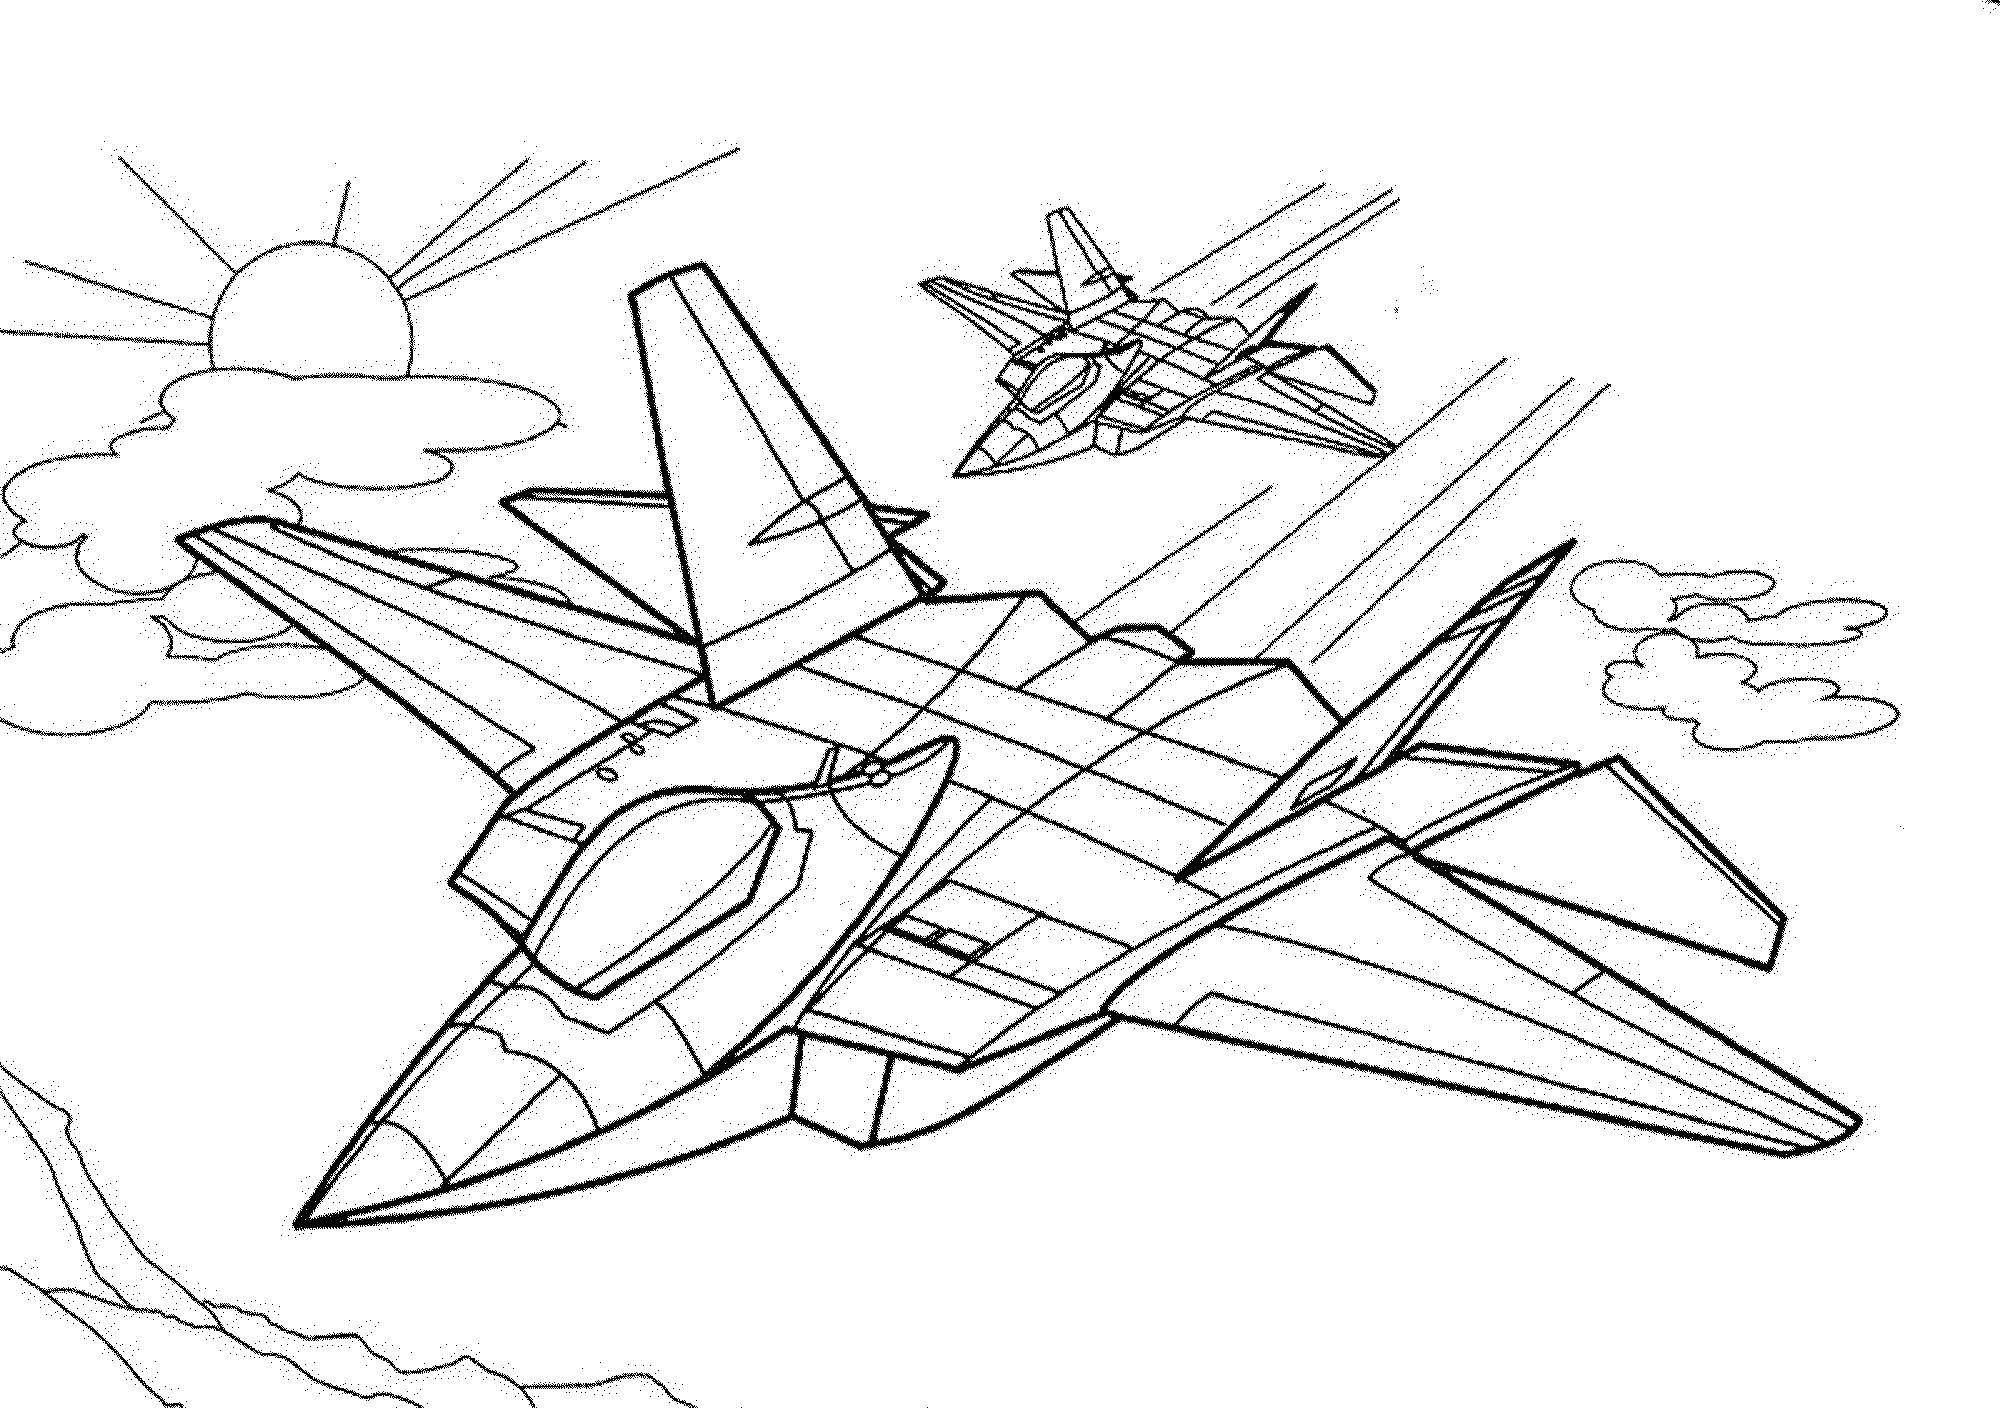 Coloring Spaceships. Category spaceships. Tags:  space ships, planes.